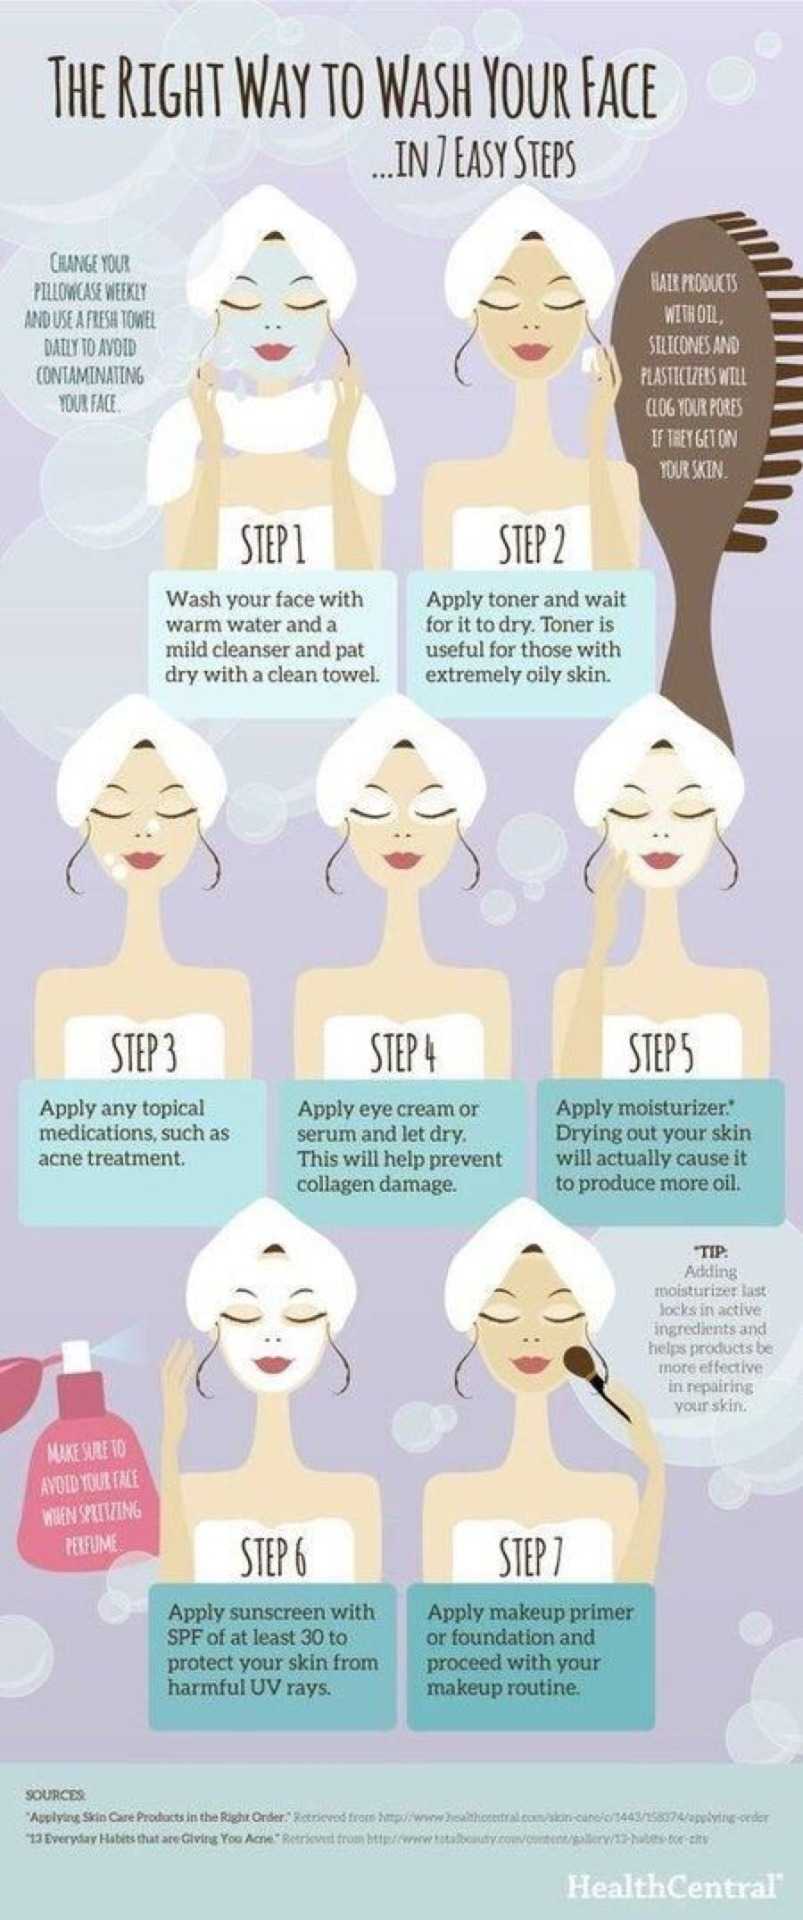 The Right Way To Wash Your Face